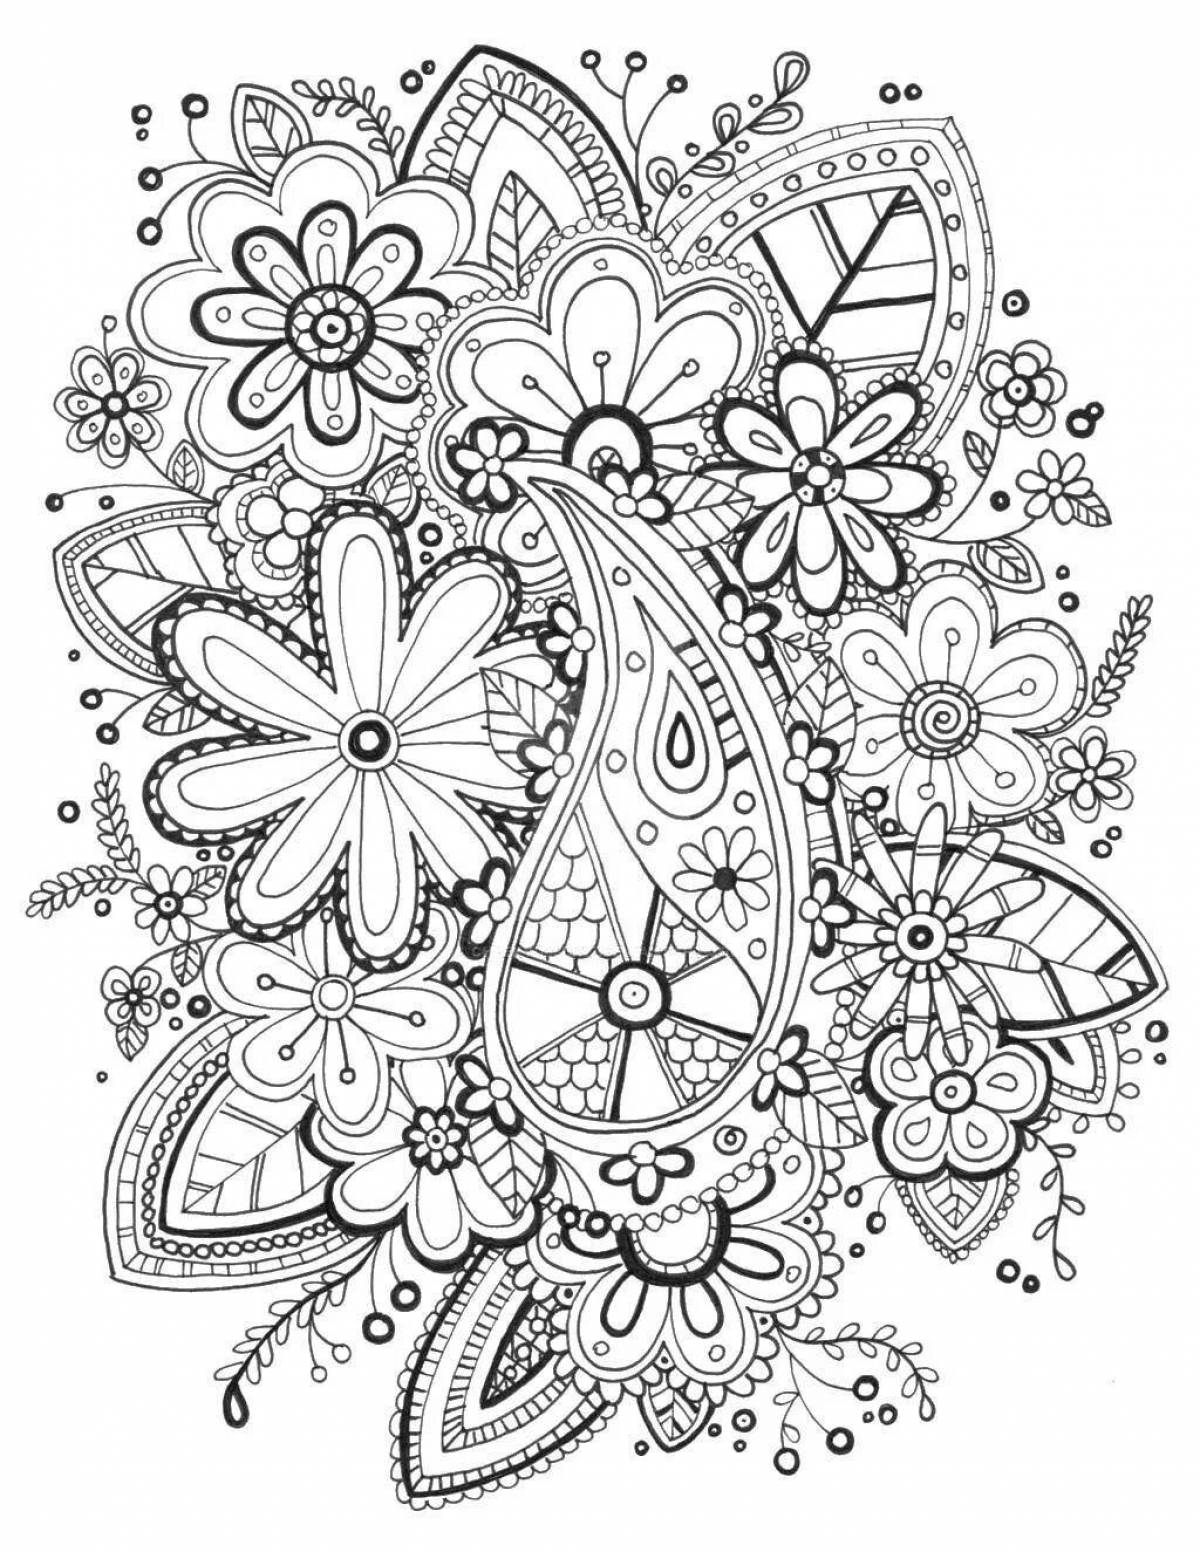 Delicate coloring pages with small patterns